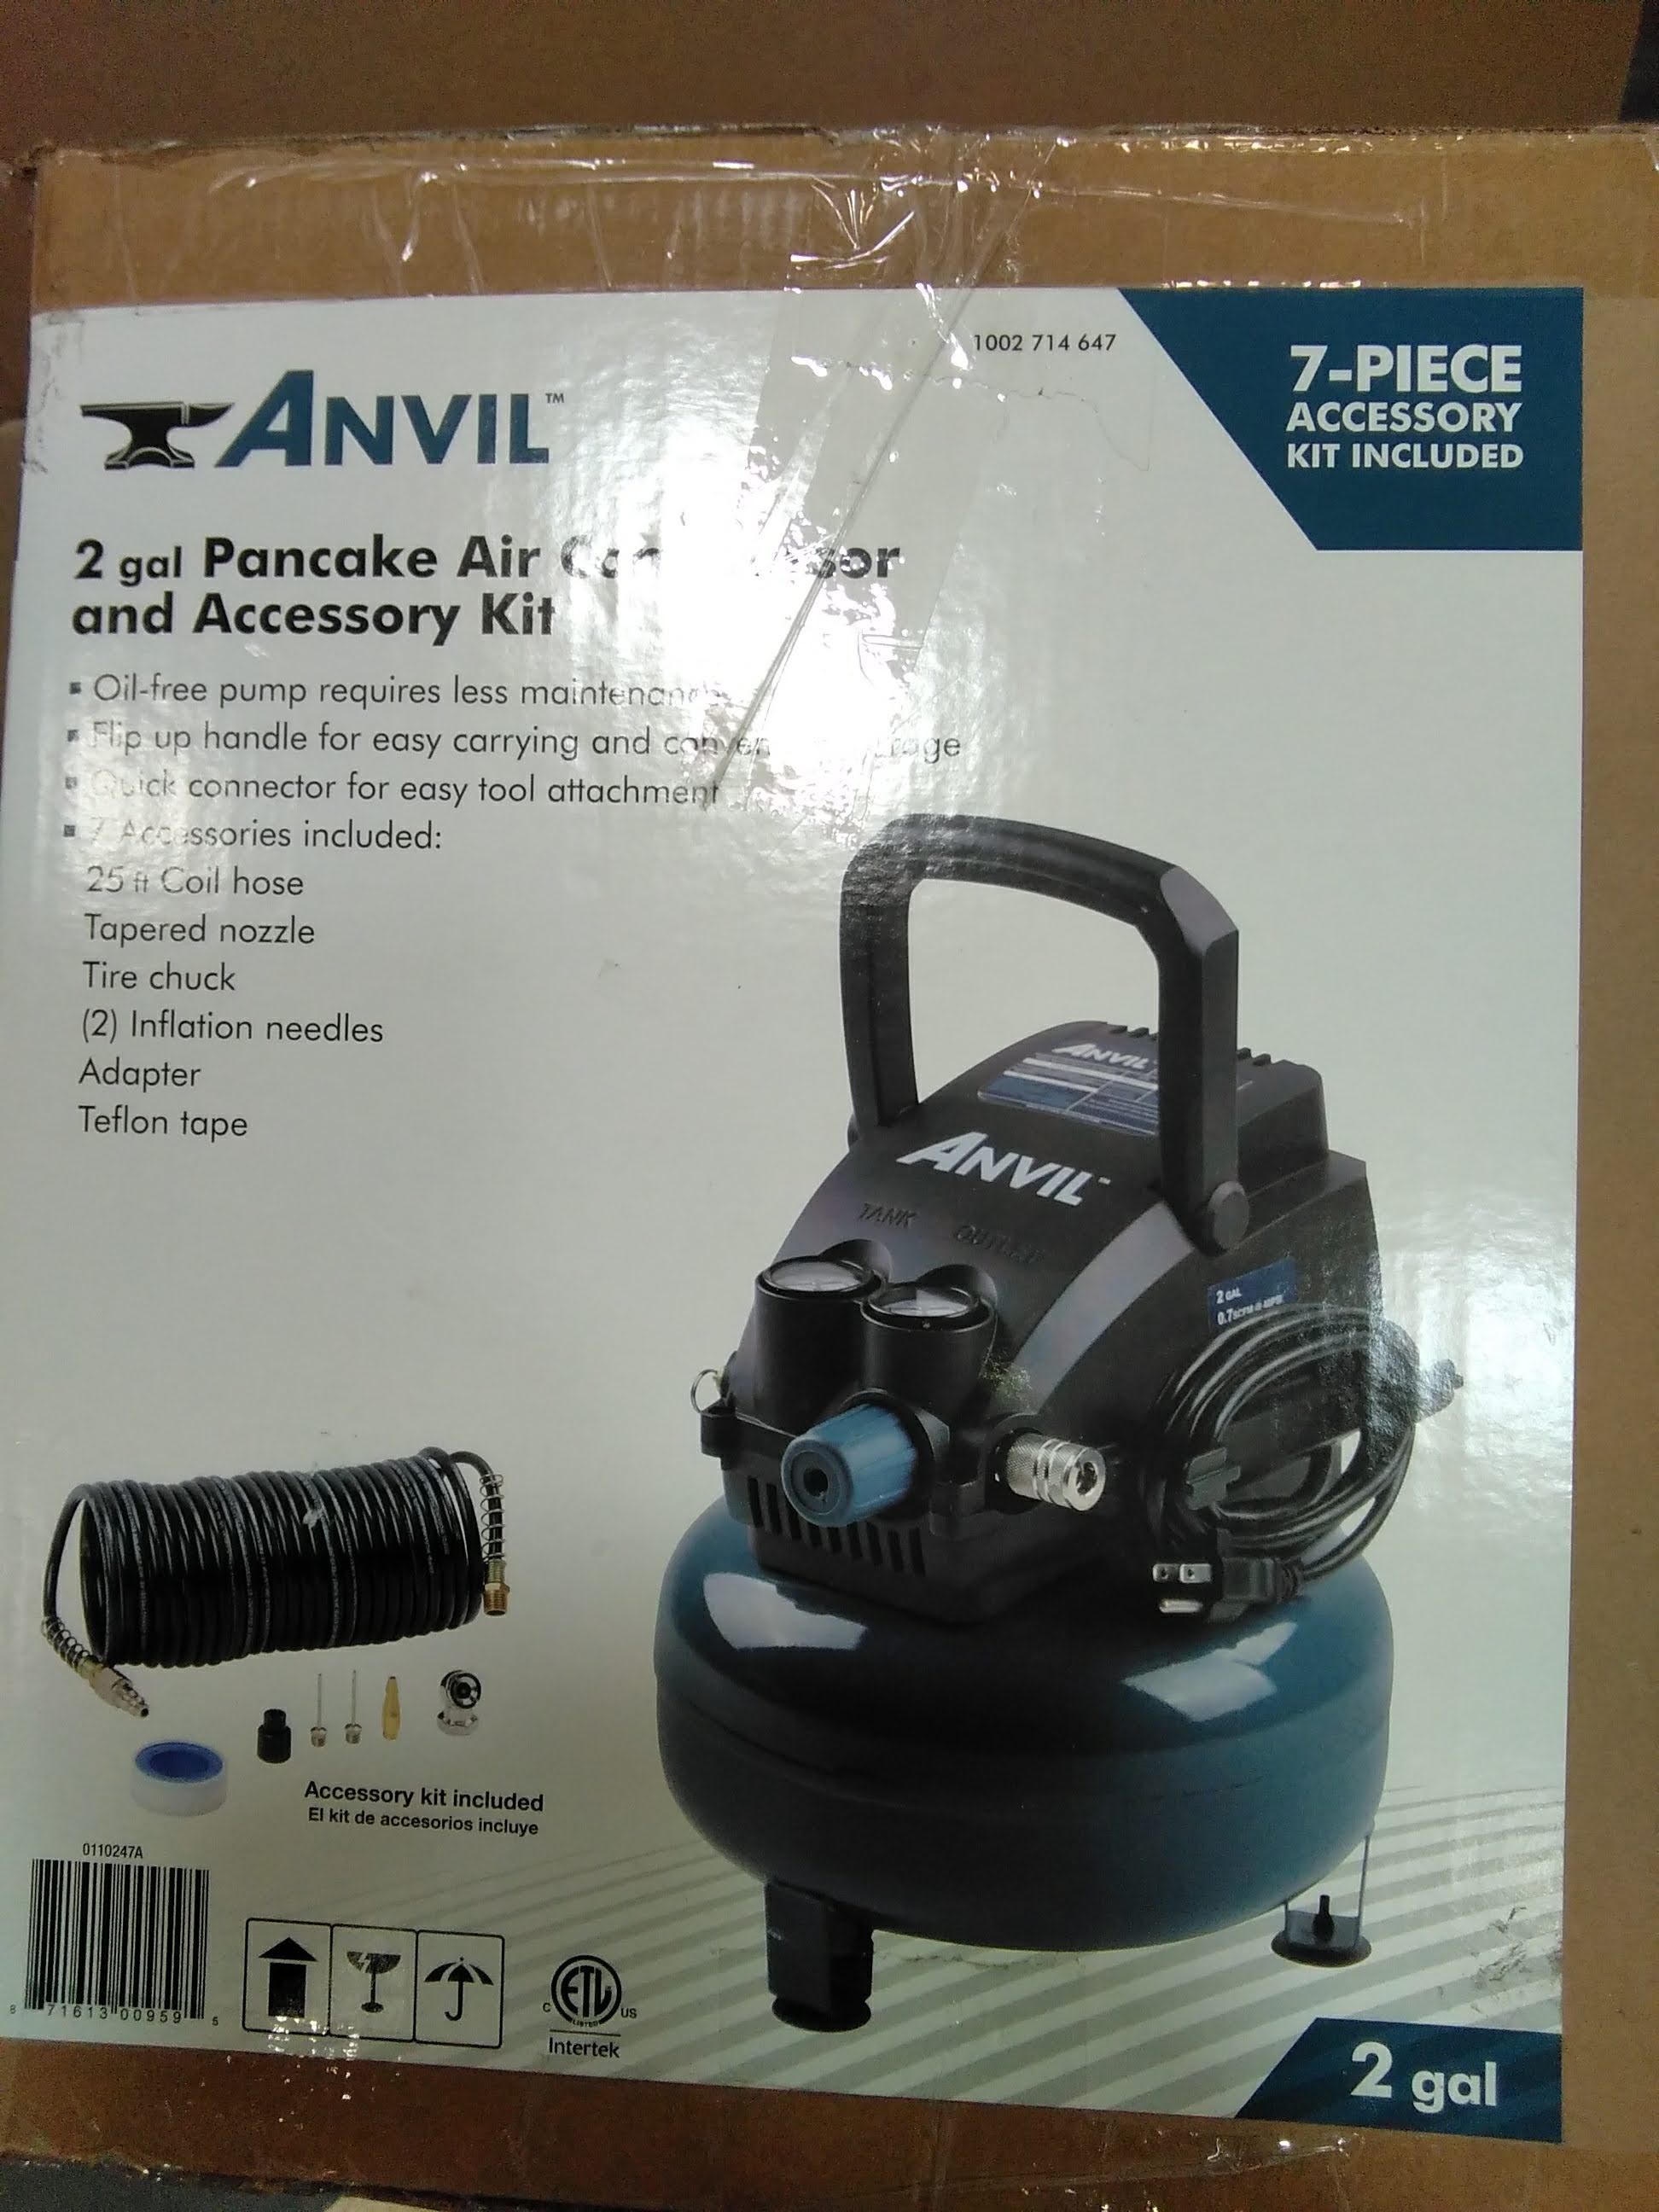 ANVIL 2G Pancake Air Compressor with 7-Pieces Accessories Kit. $79.35 ERV